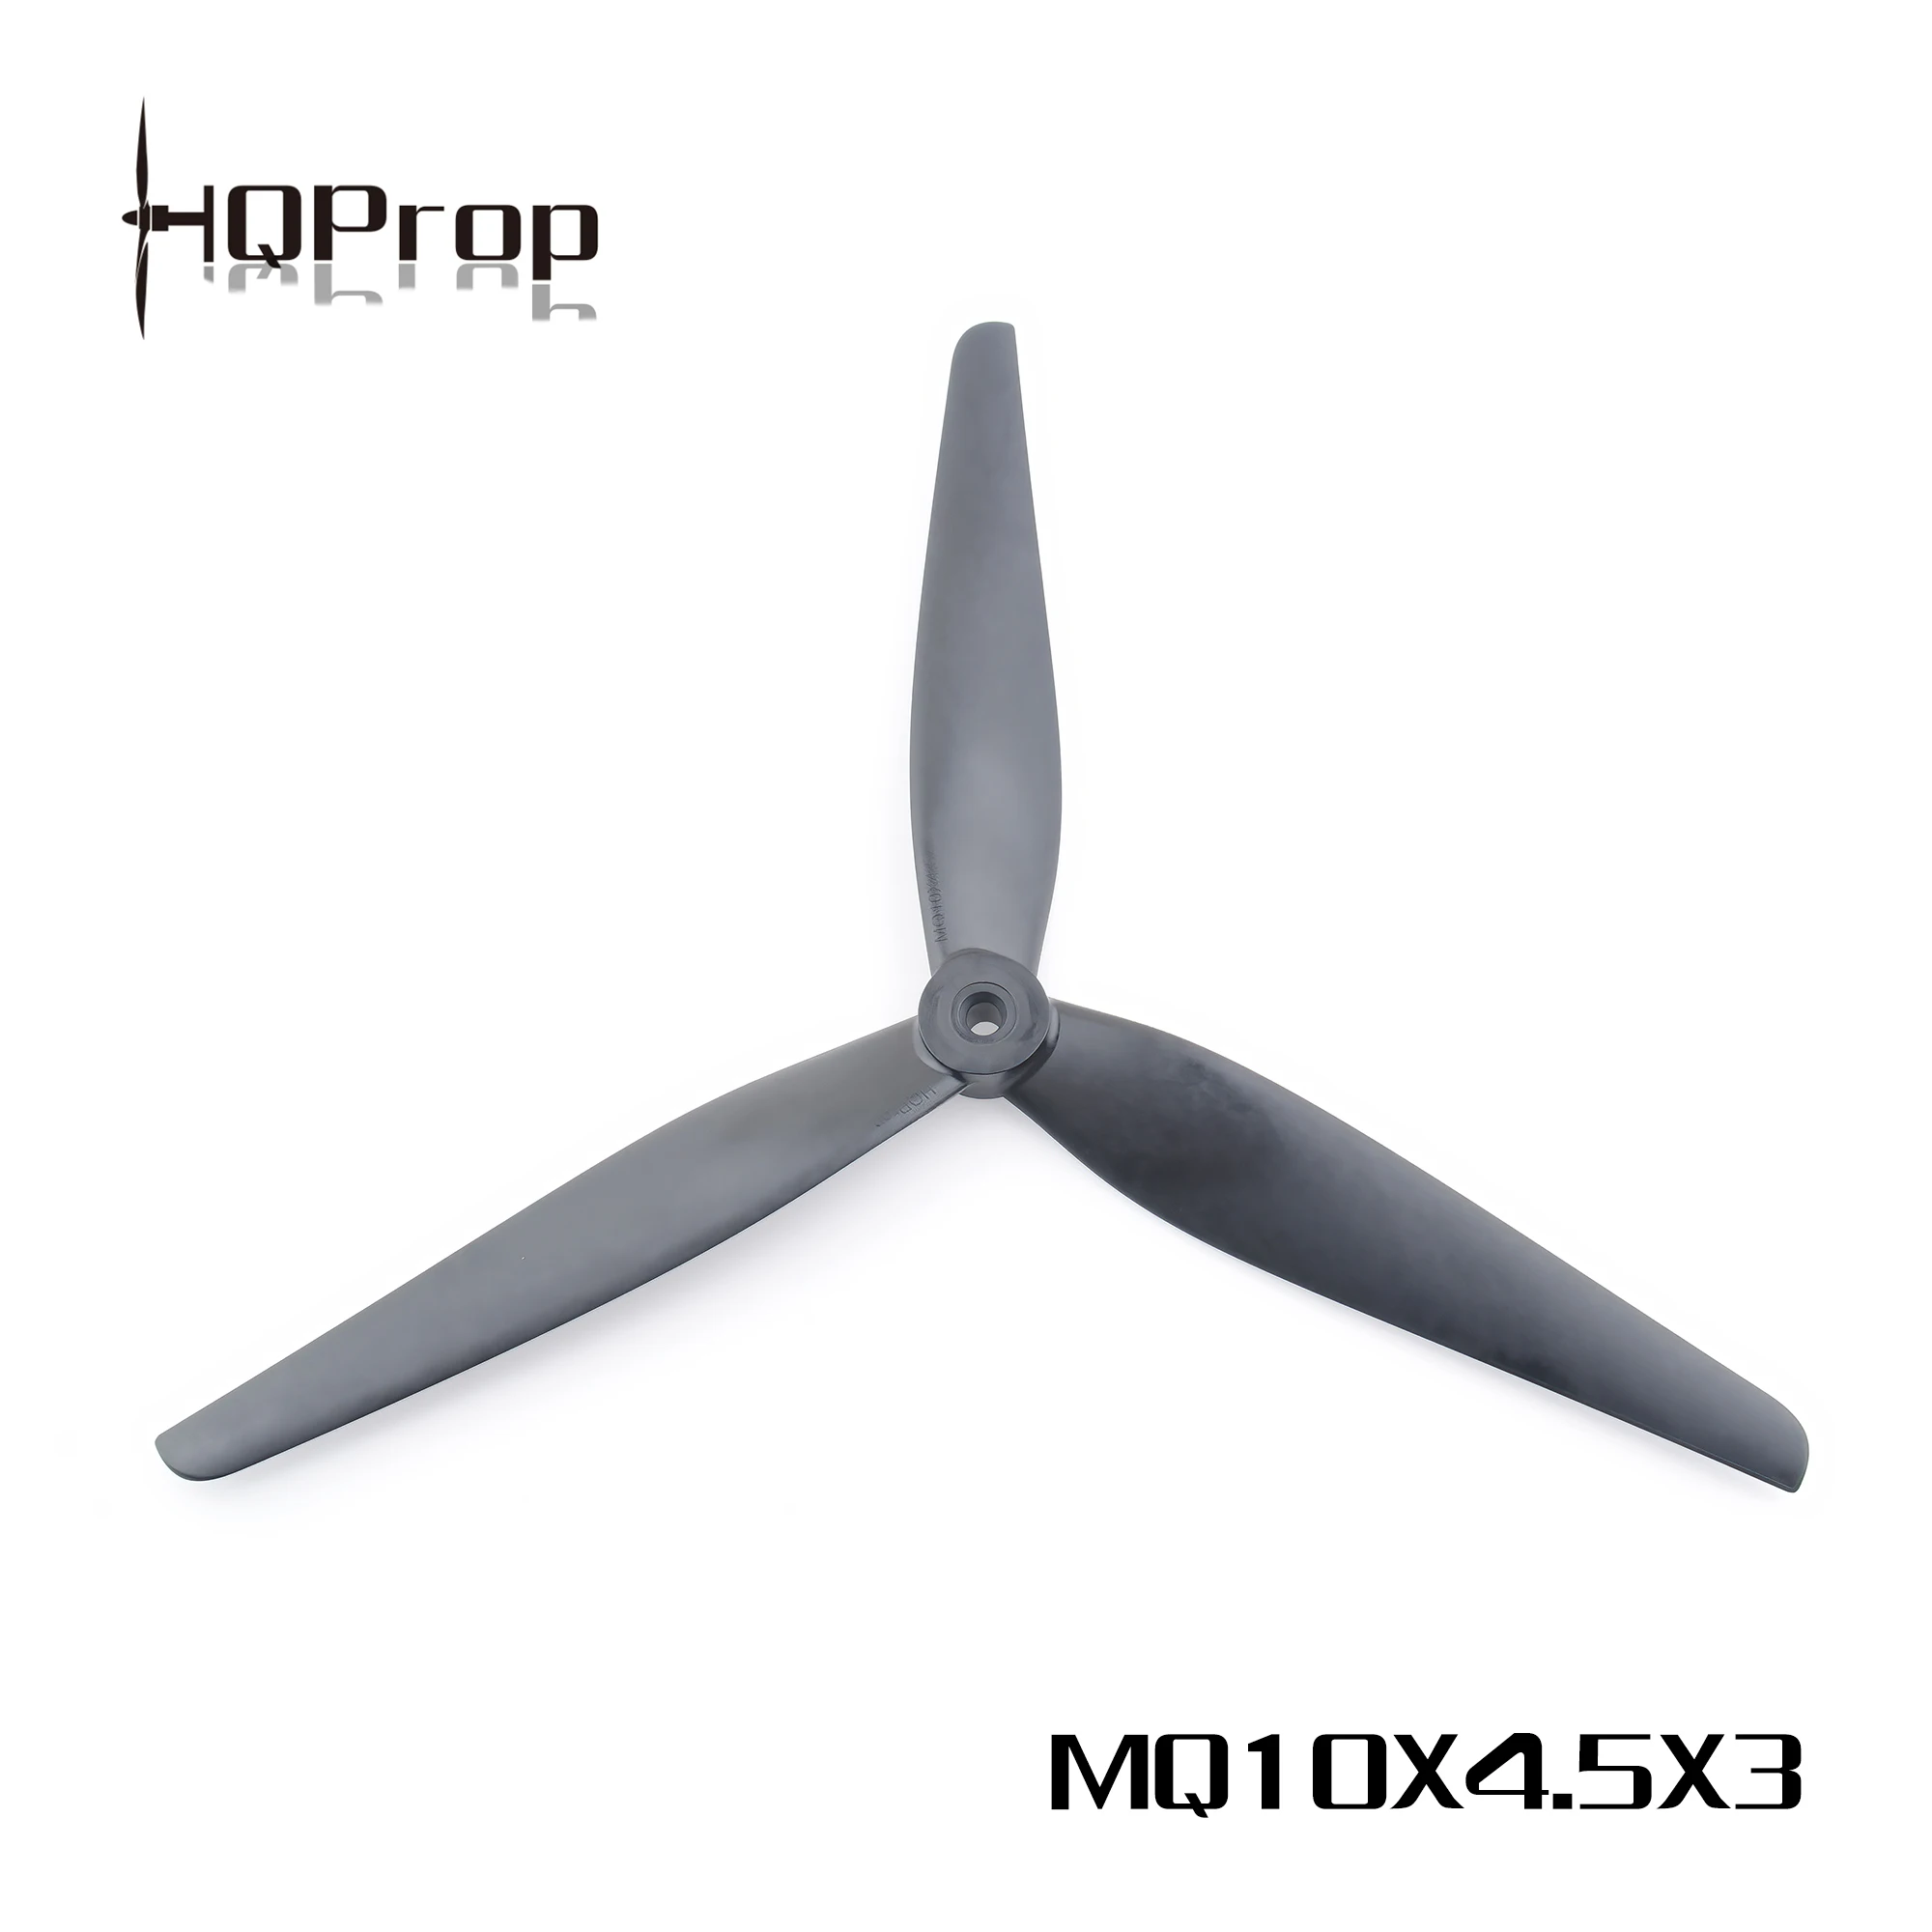 

2Pairs(2CW+2CCW) HQPROP 10X4.5X3 1045 3-Blade Black-Glass Fiber Reinforced Nylon Propeller for MacroQuad 10inch Cinelifter